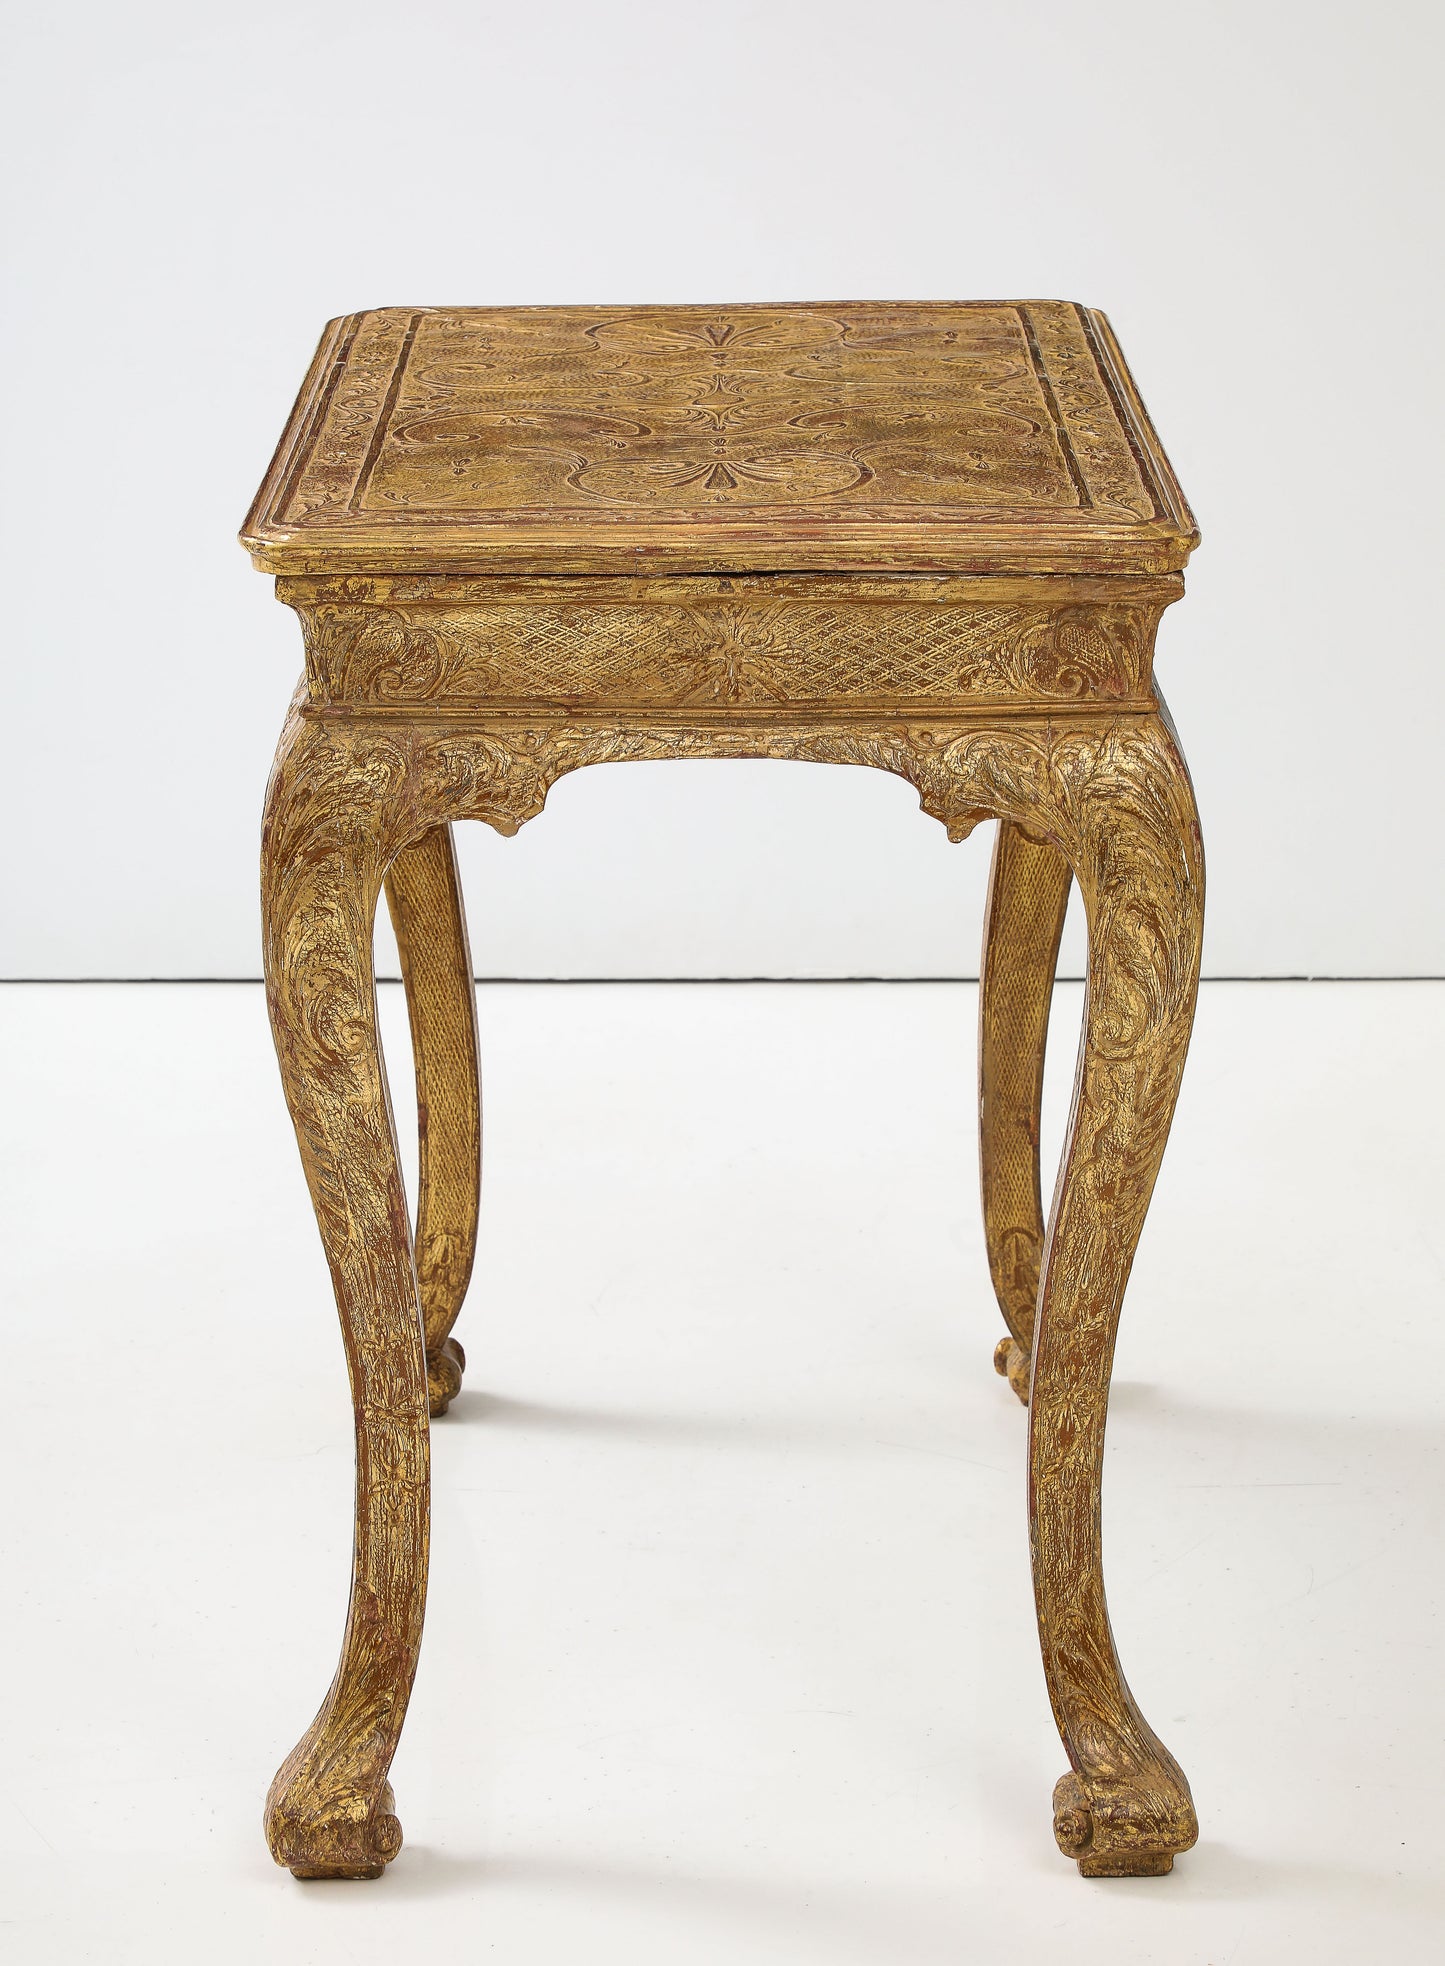 A CARVED GESSO CONSOLE TABLE circa 1720